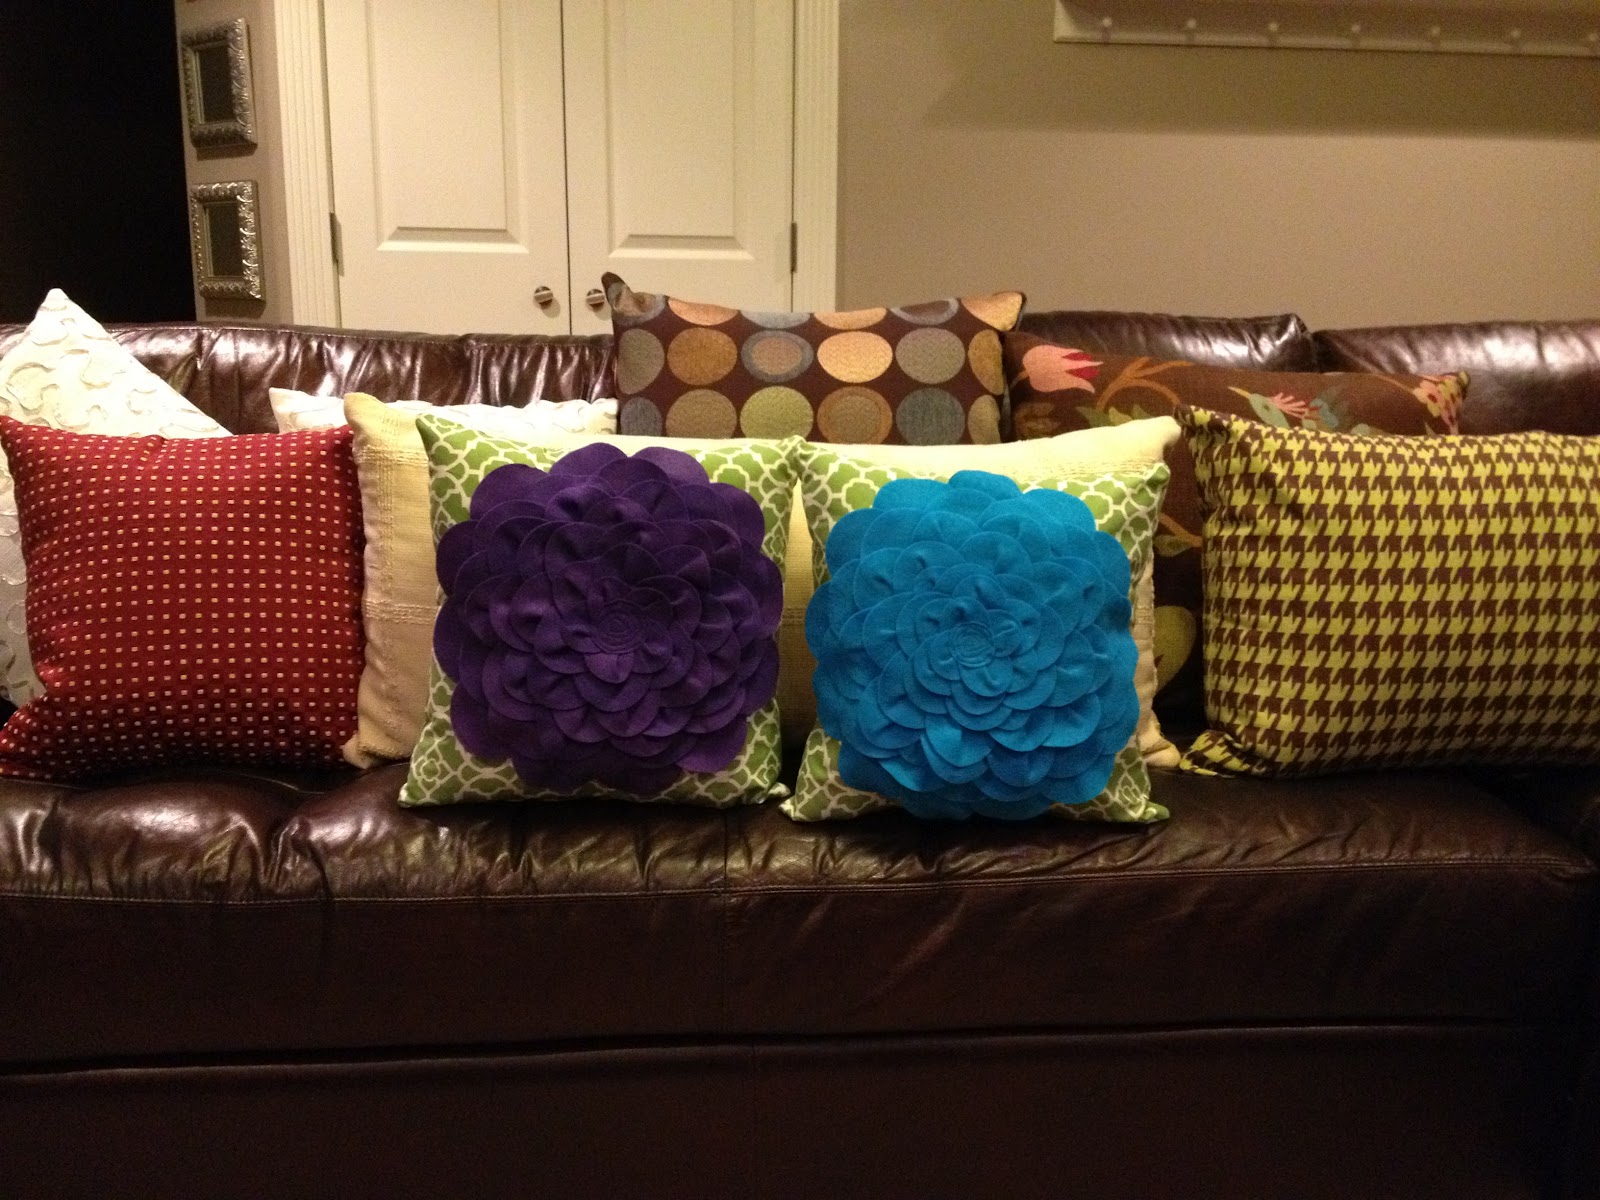 The Easiest Pillow Cover Ever - Organize and Decorate Everything